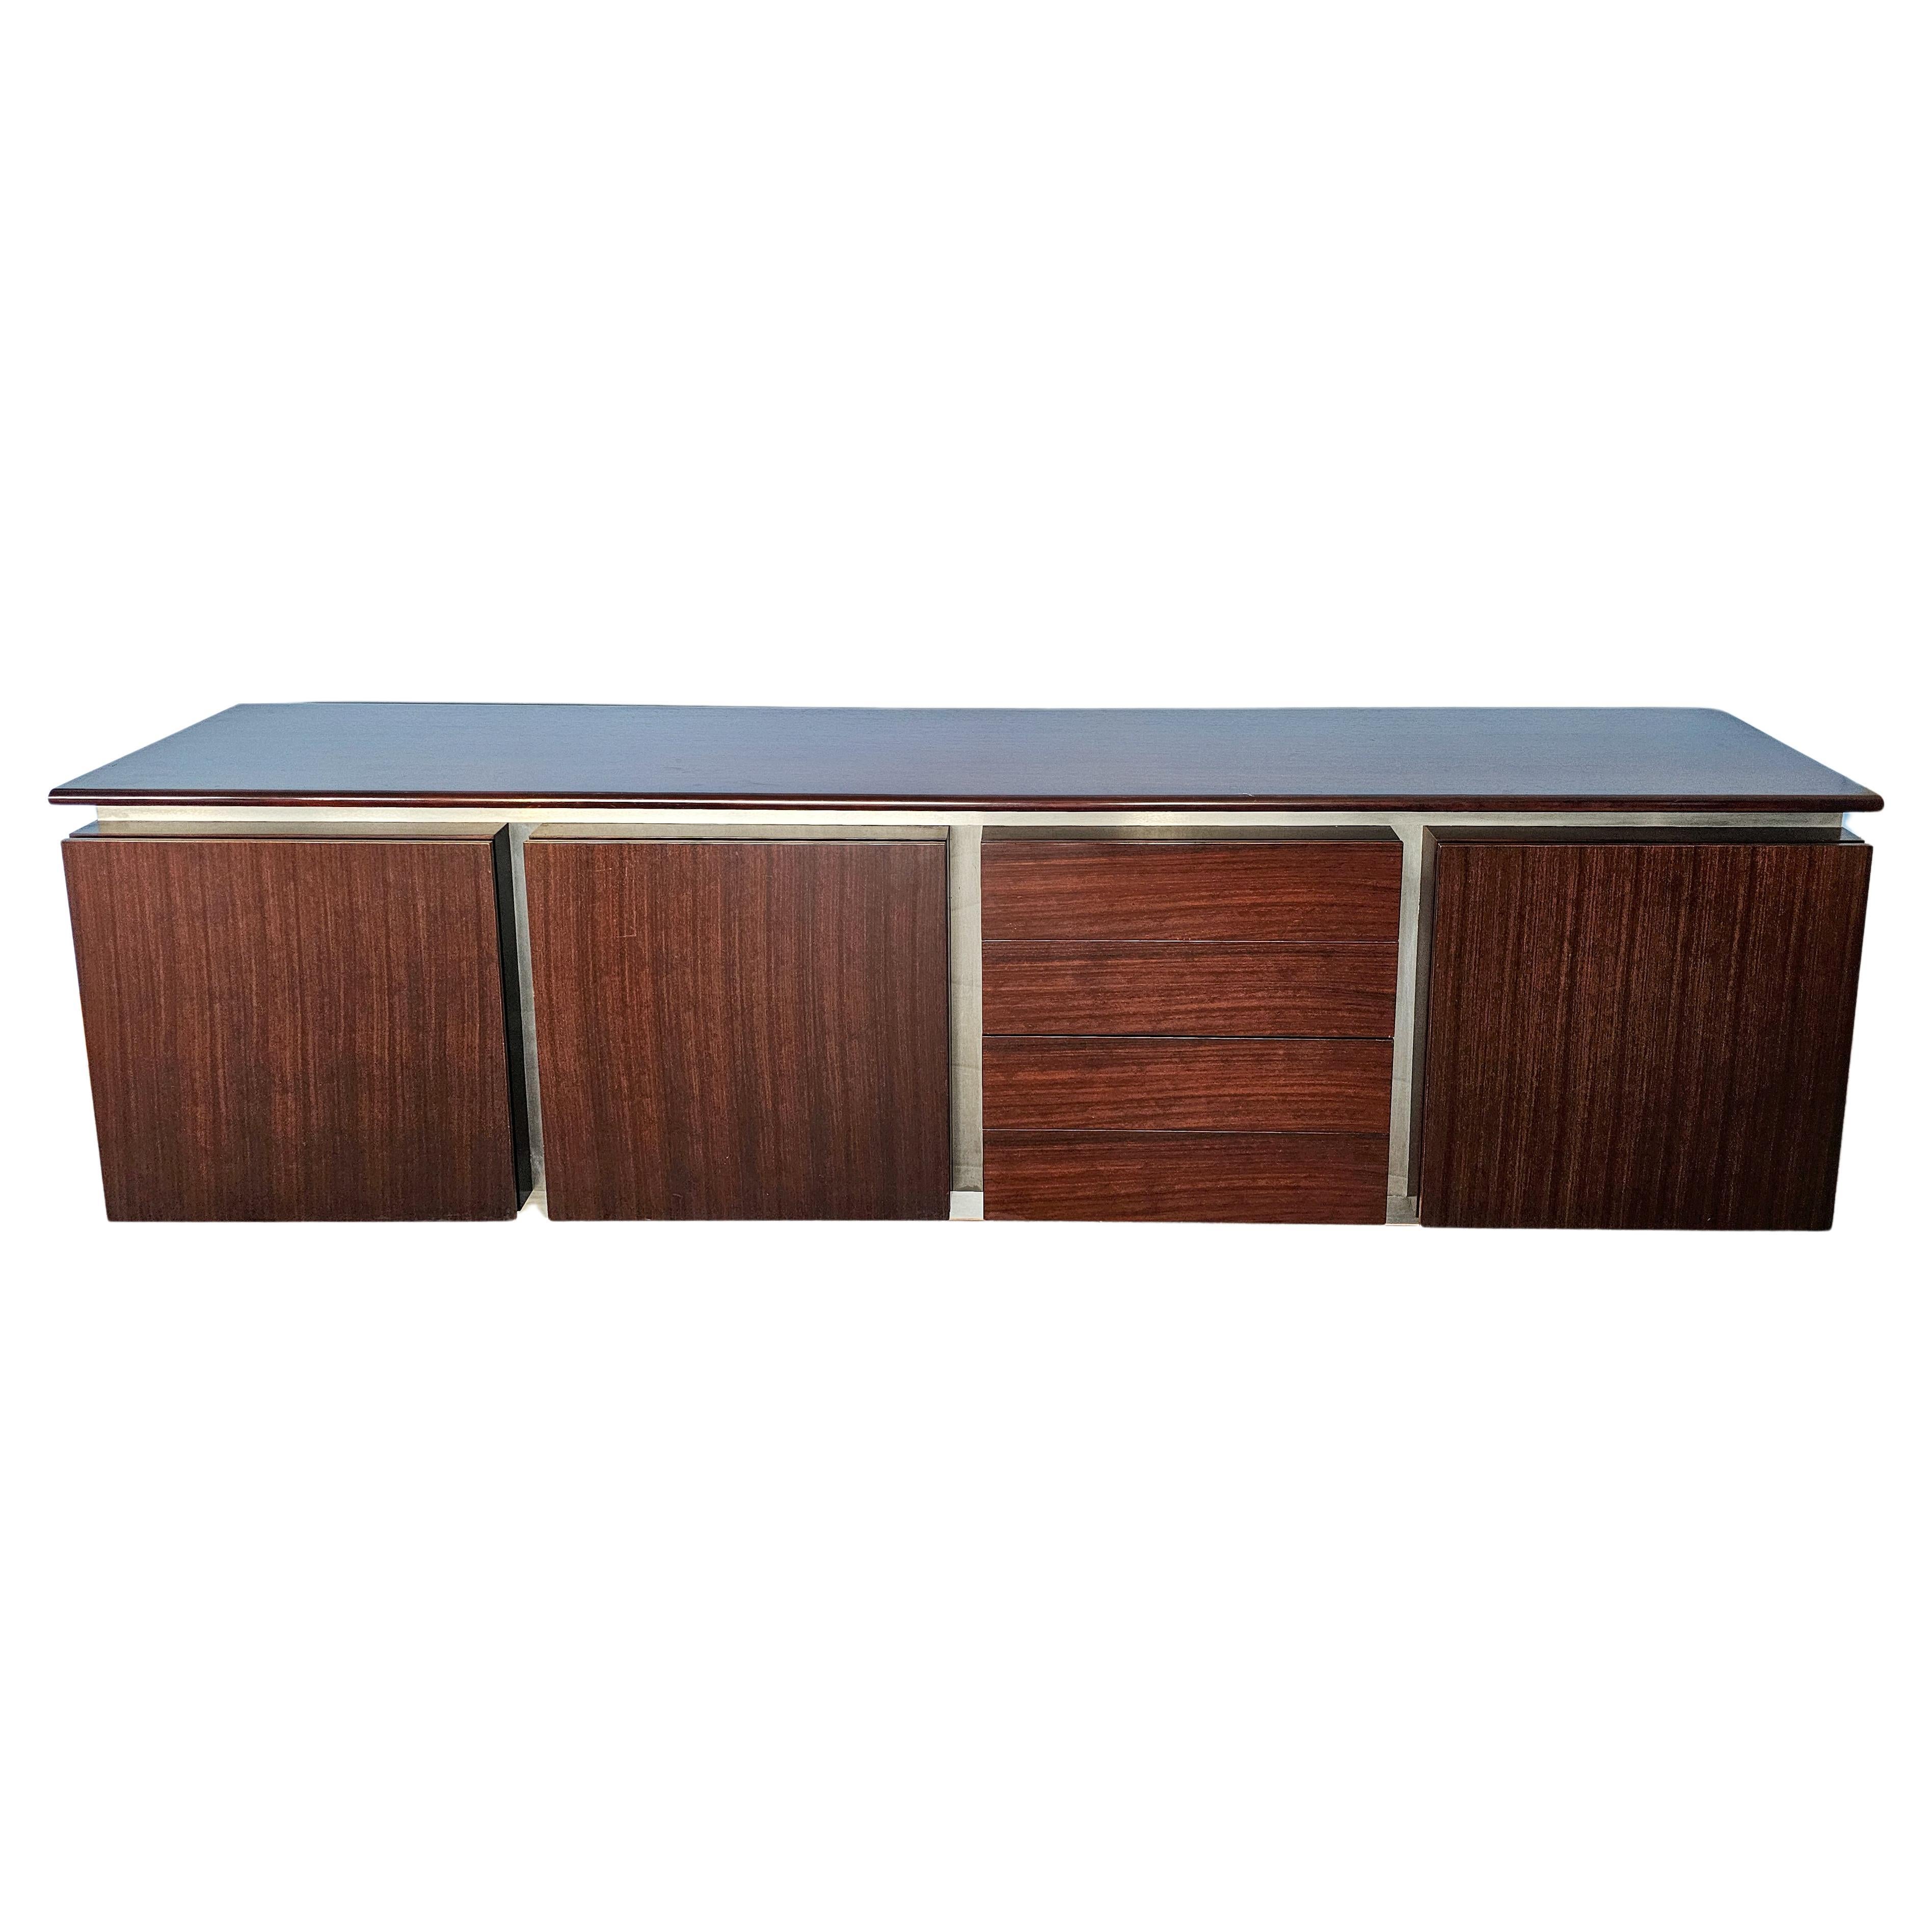 Italian Sideboard Parioli designed by Giotto Stoppino and Marco Acerbis in 1980s For Sale